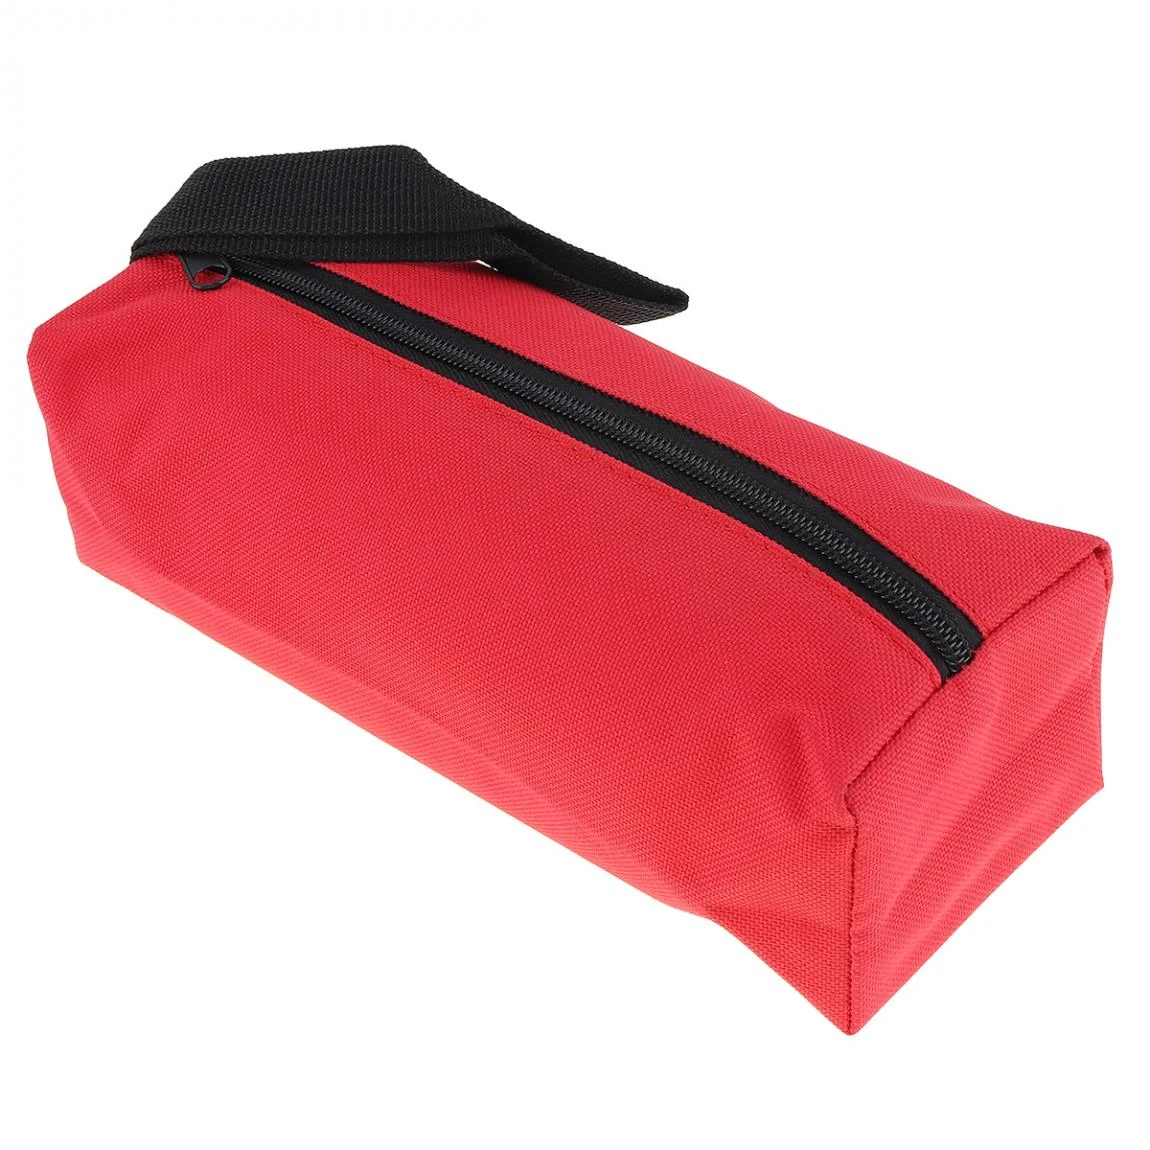 600D Multifunctional Canvas Tool Storage Bag Oxford Cloth Parts Bag with Zipper